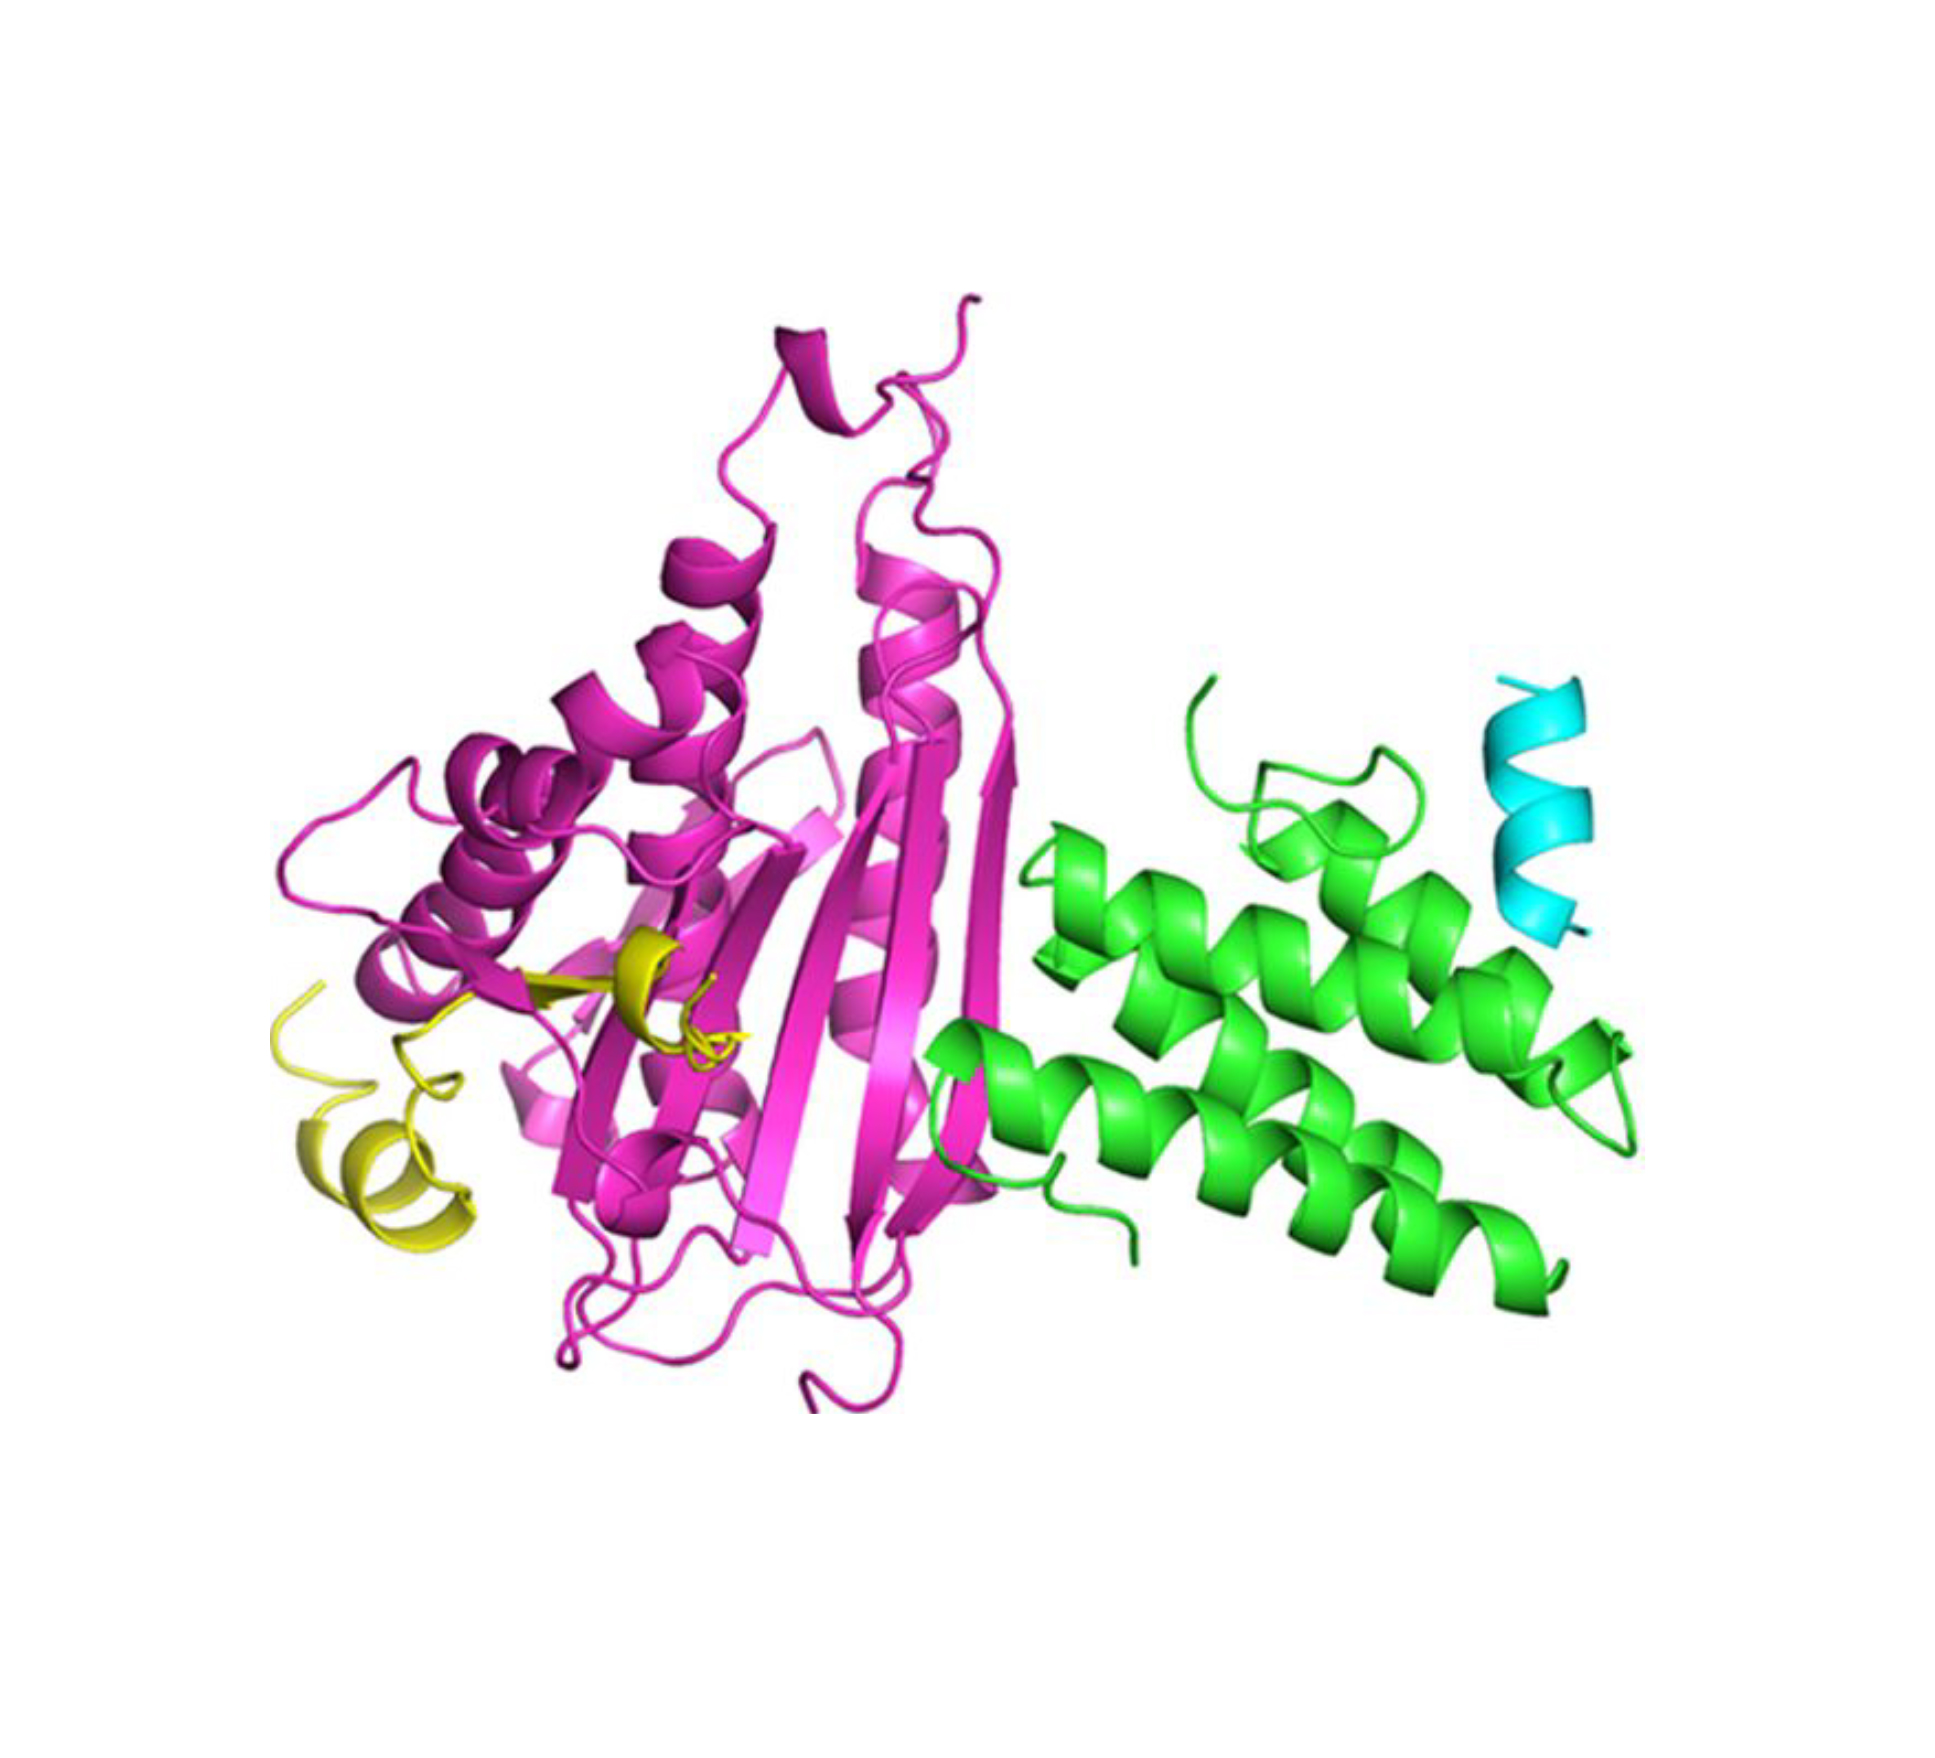 Scientific figure containing ribbon-like proteins in various colors.